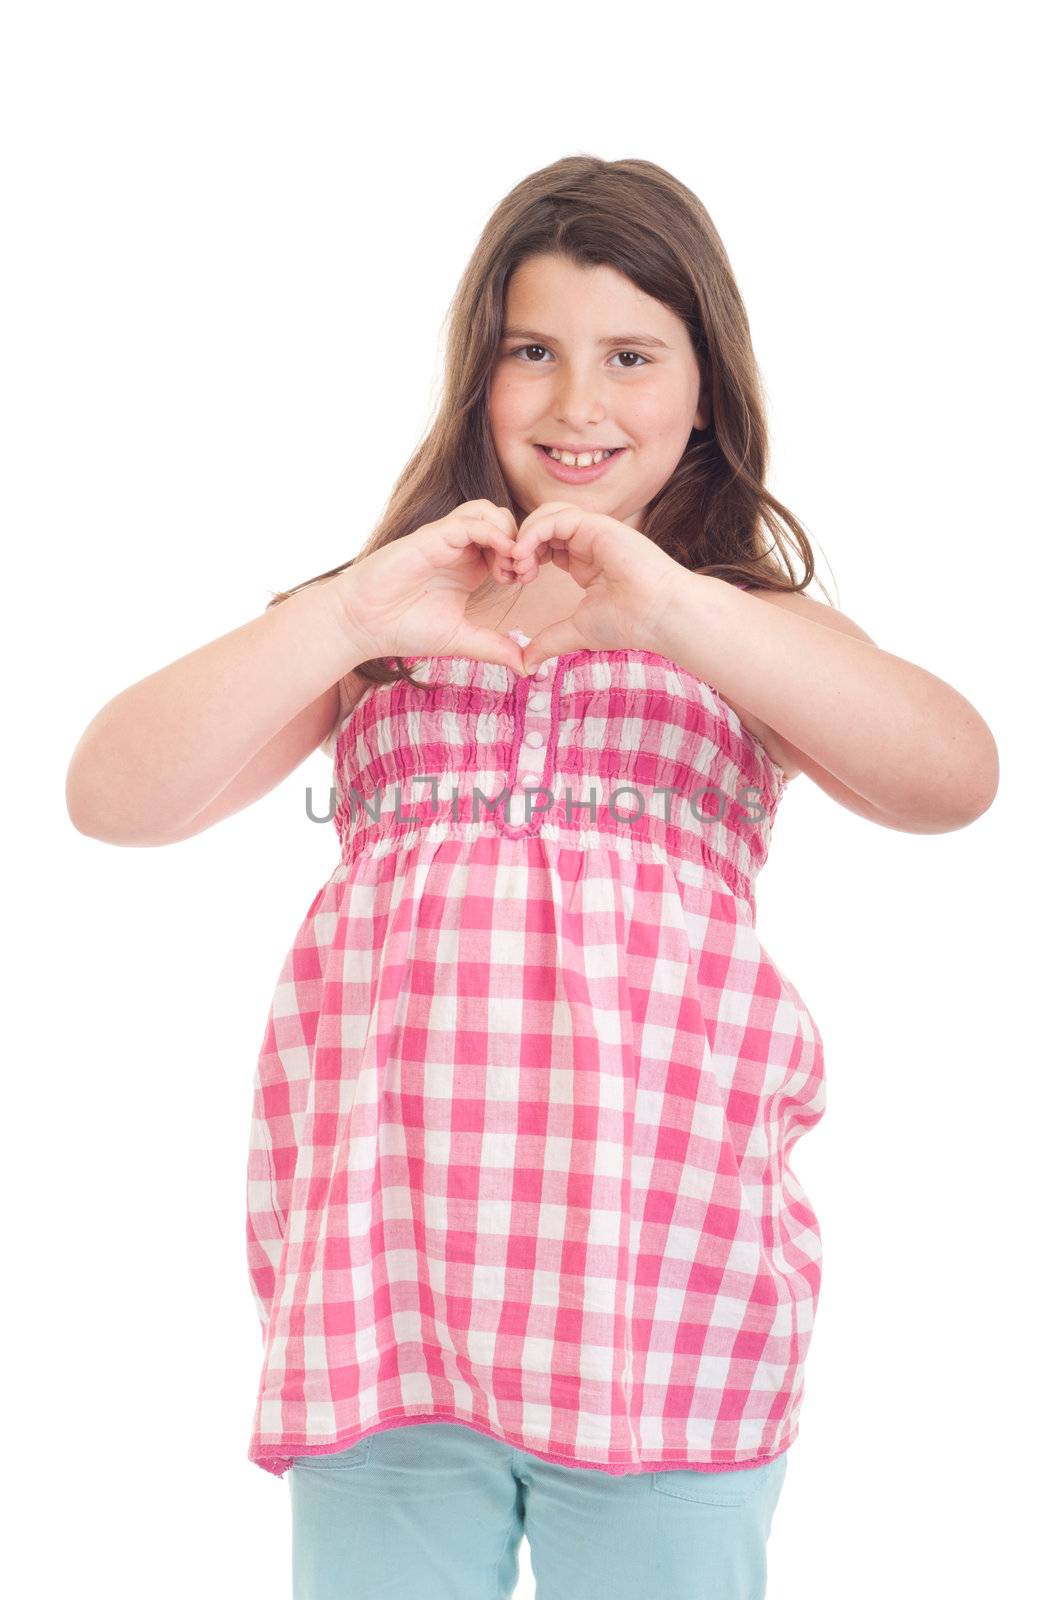 beautiful and smiling little girl showing heart symbol in a pink top (isolated on white background)